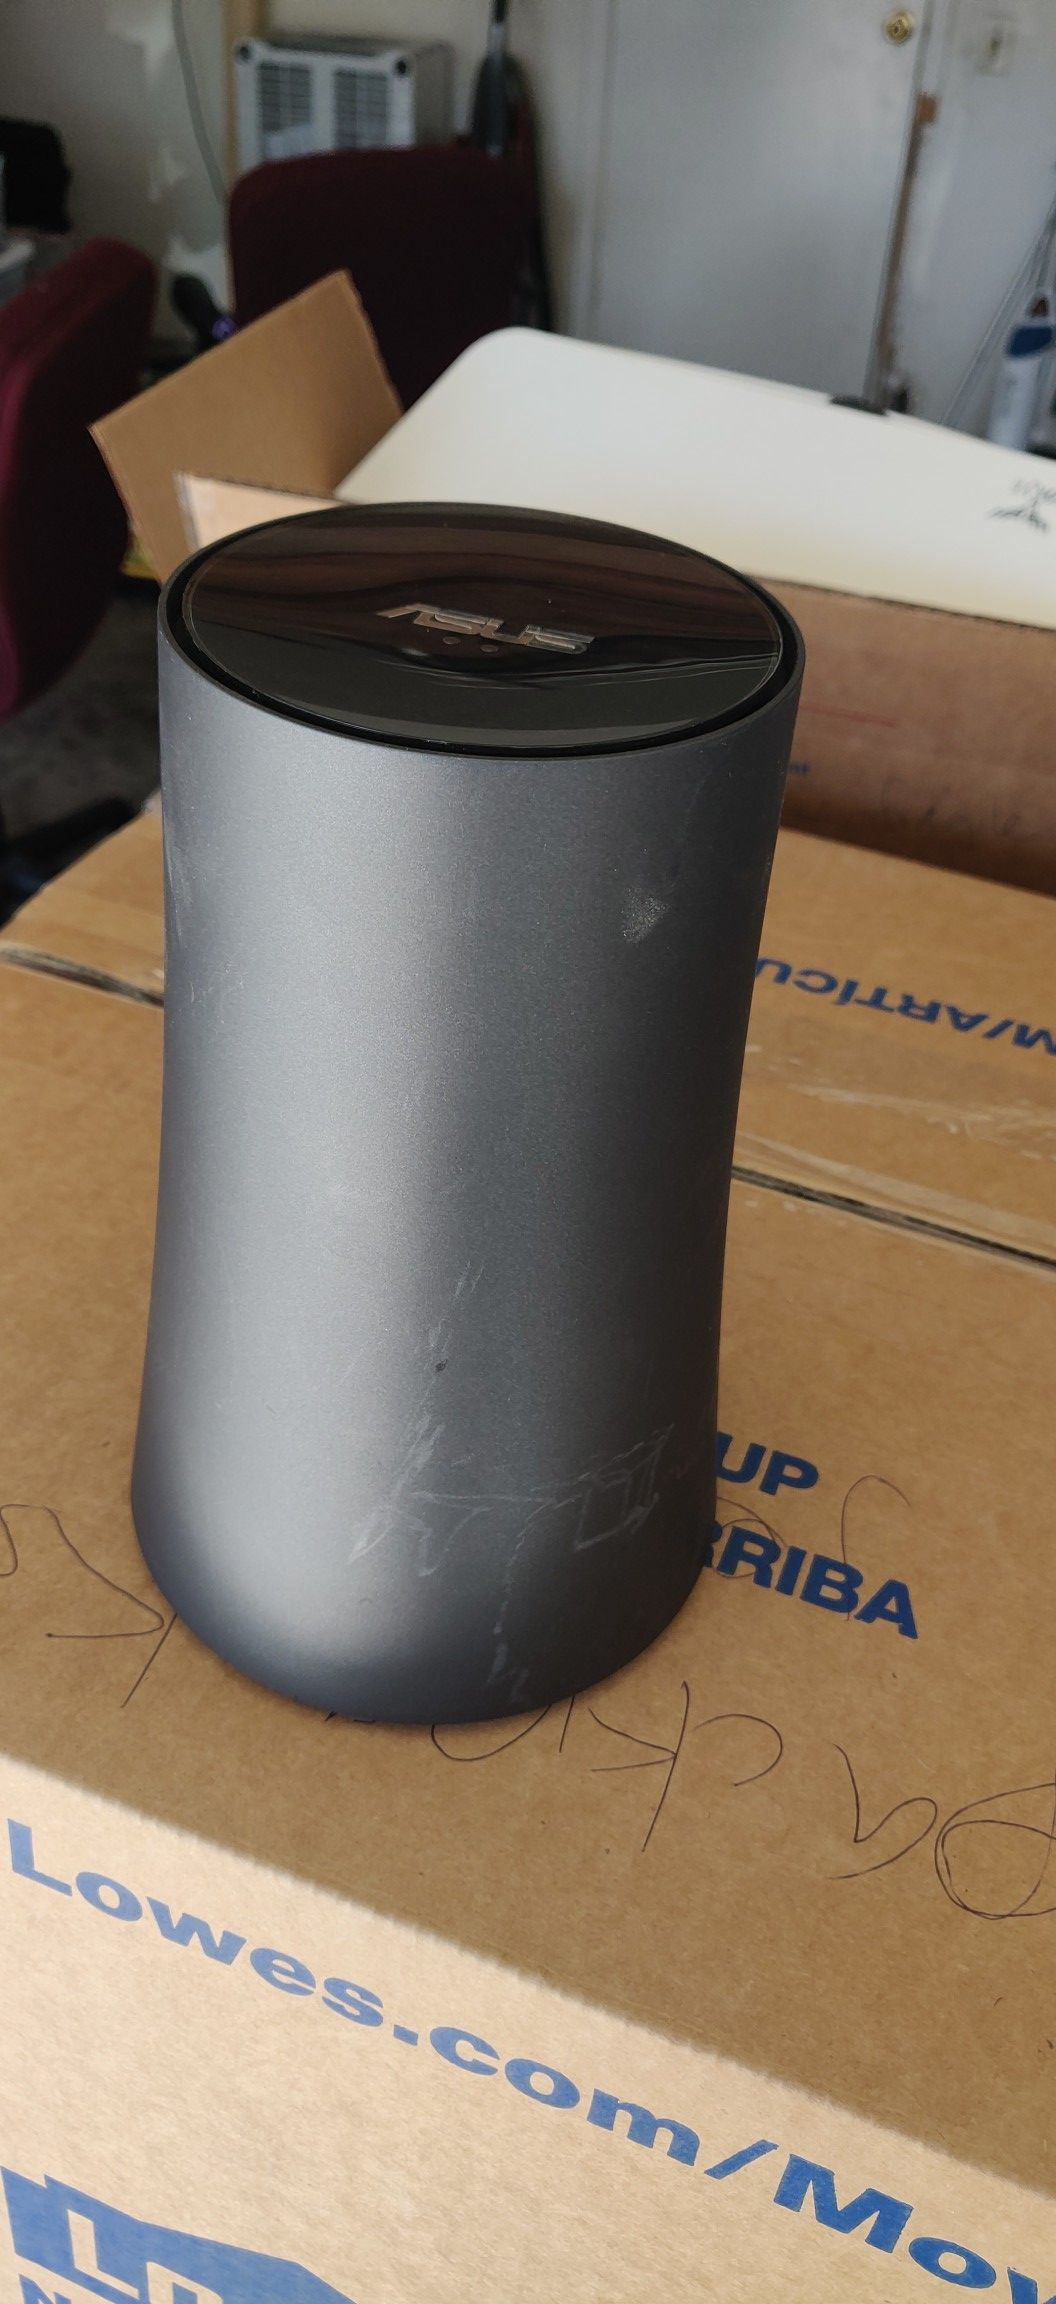 Asus onhub router